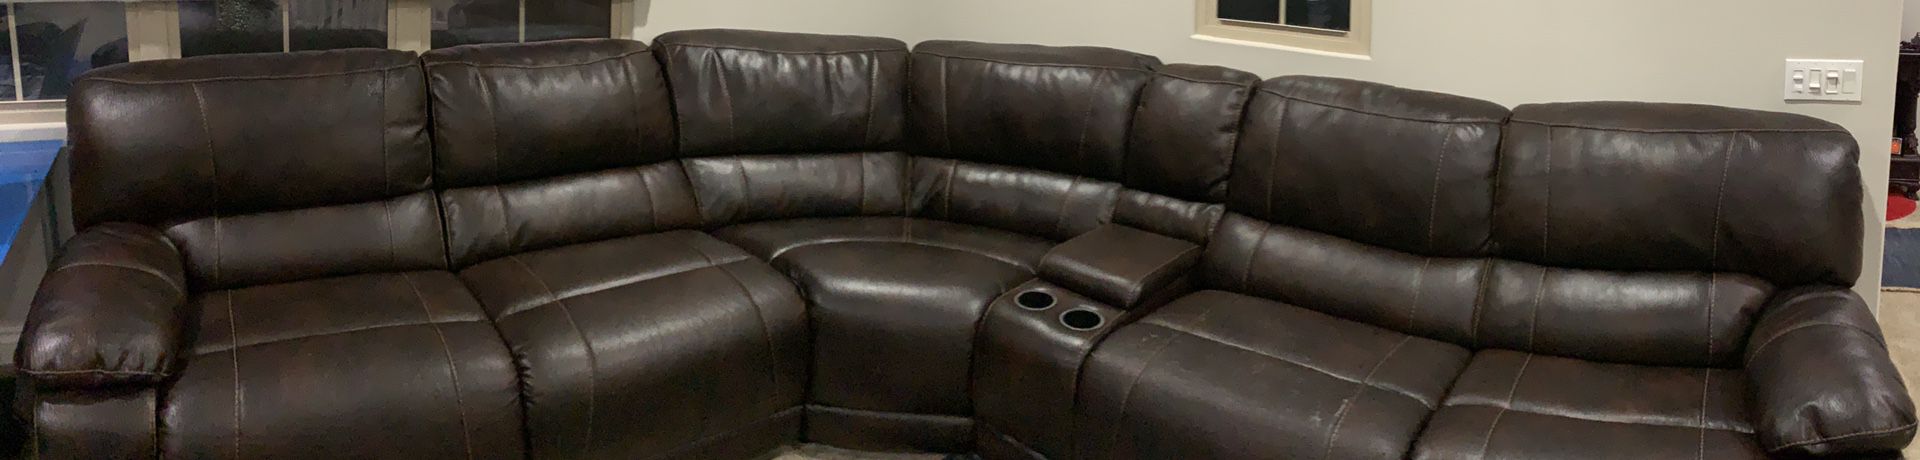 Free- 5 seater couch with 2 recliners and cup holders